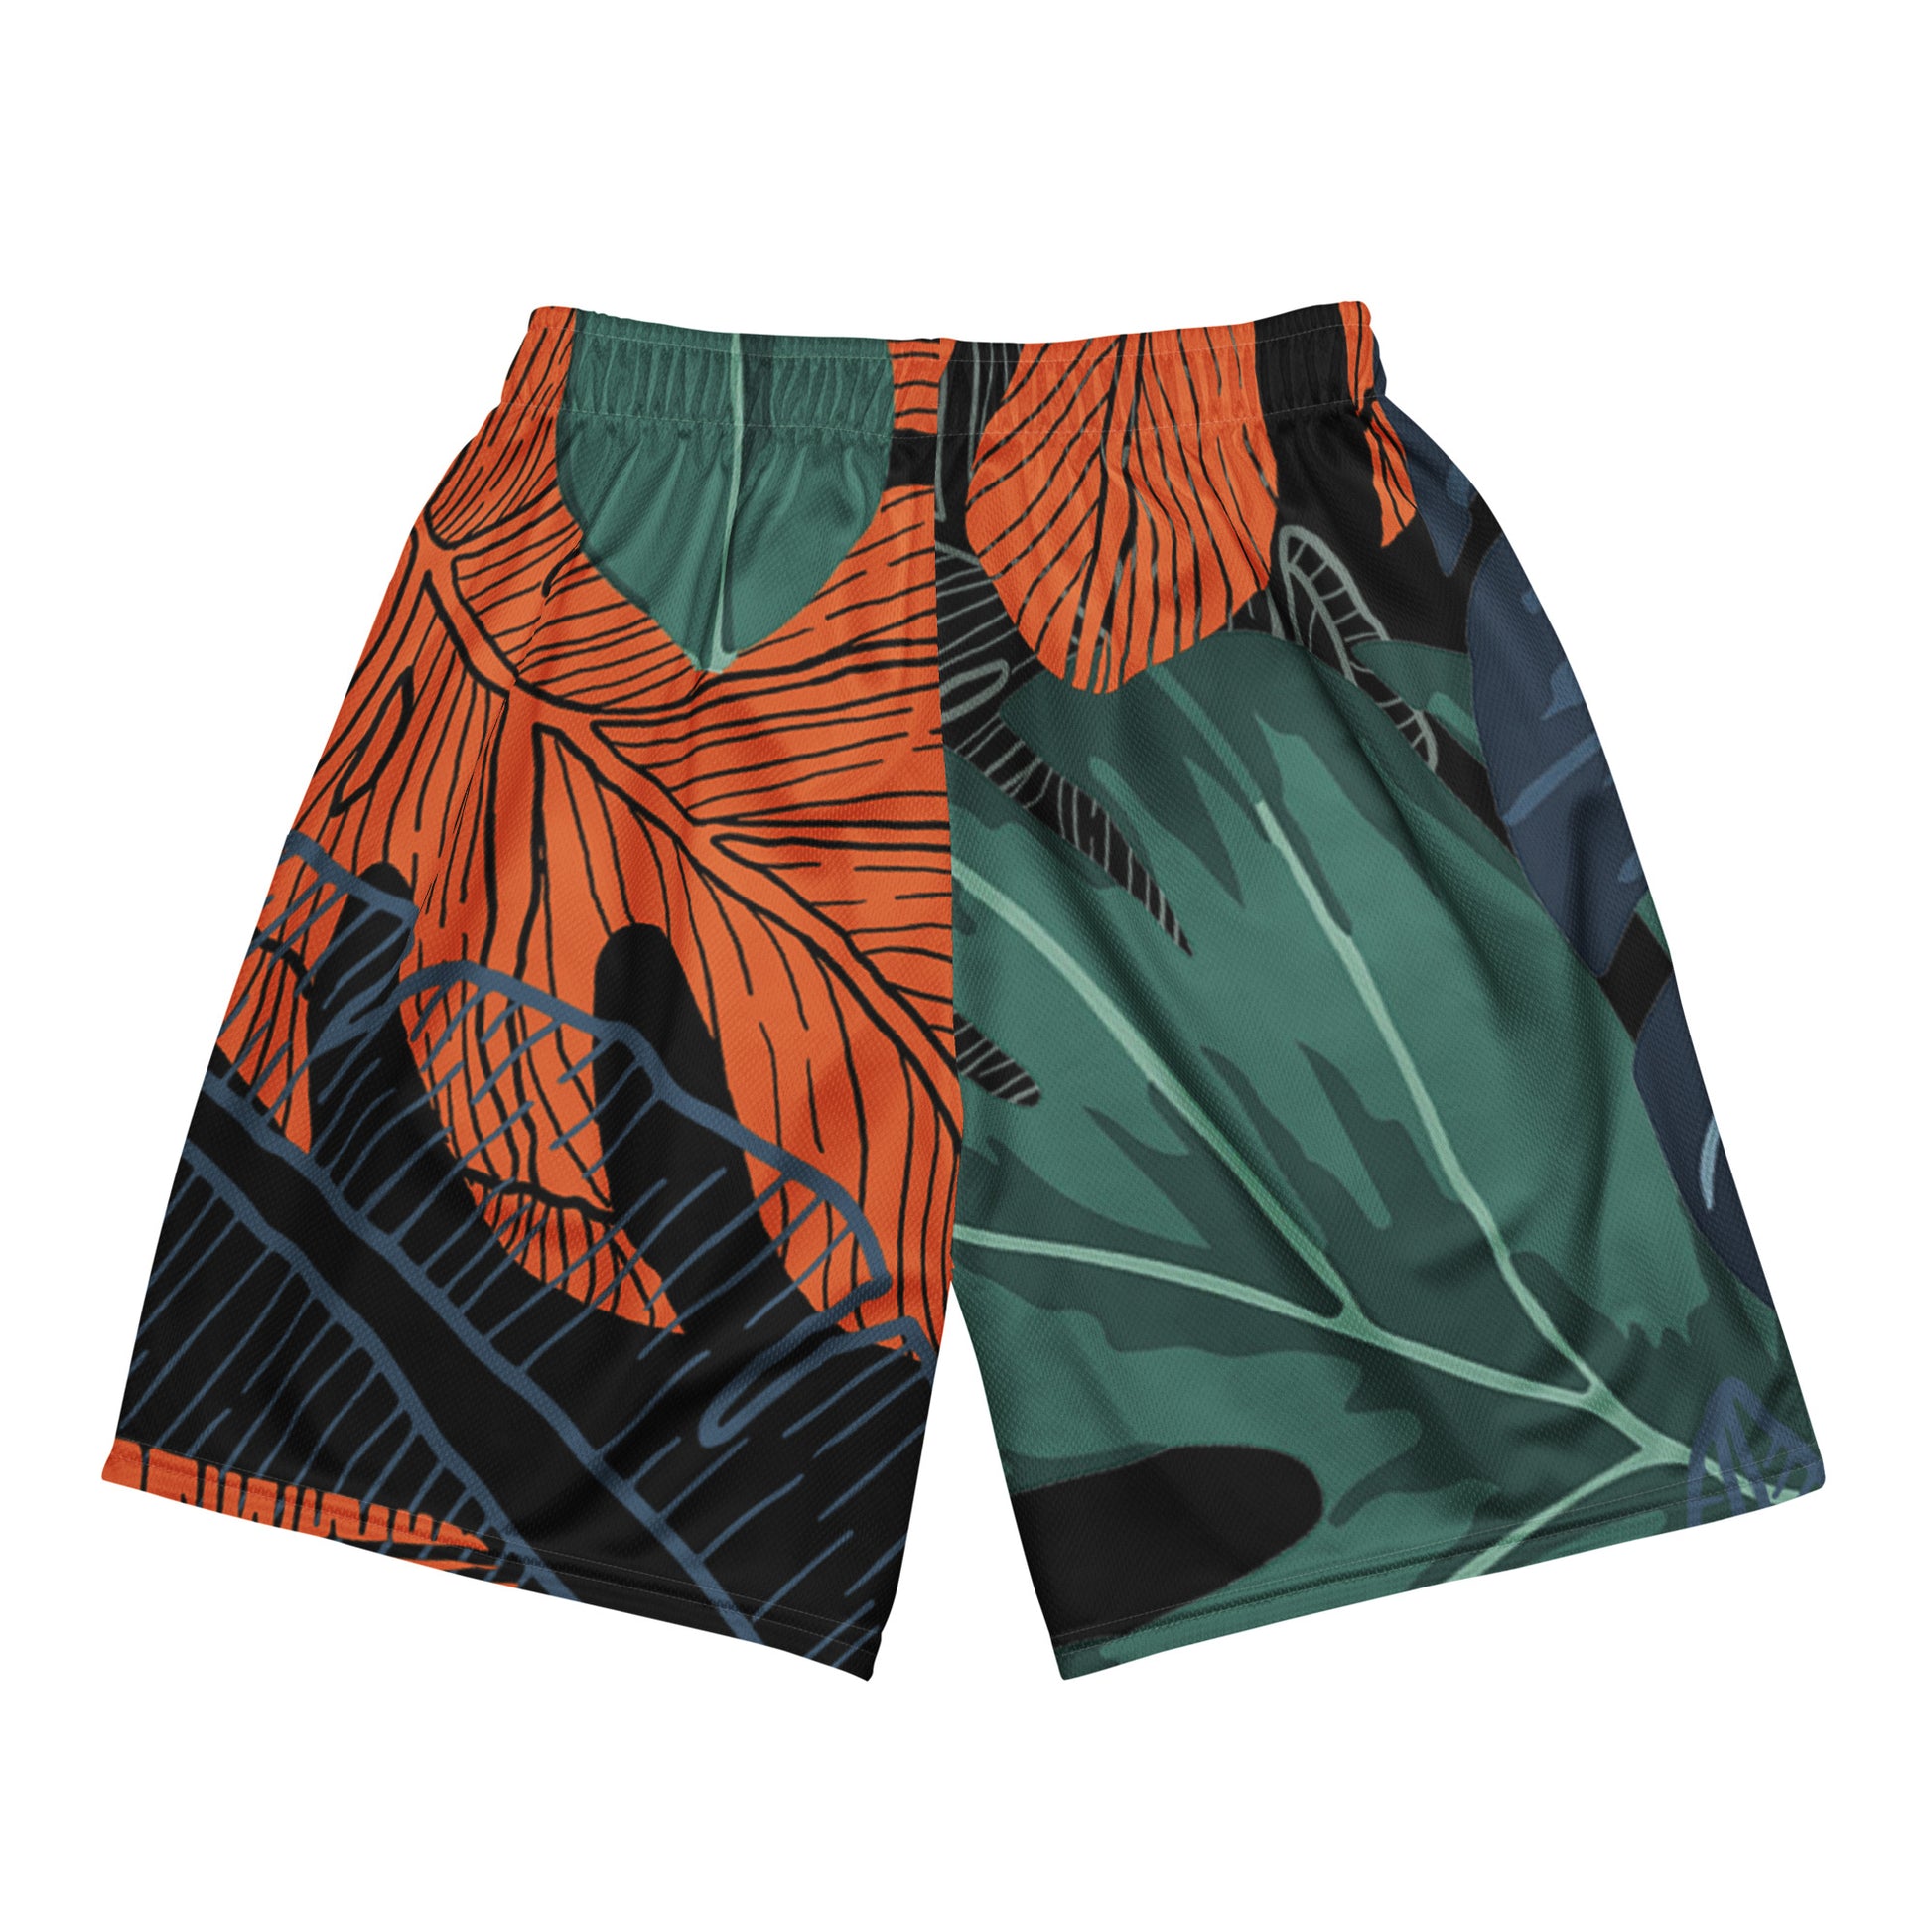 Men's Goat Mesh Shorts - Ultimate Comfort and Style – The GOAT Strength